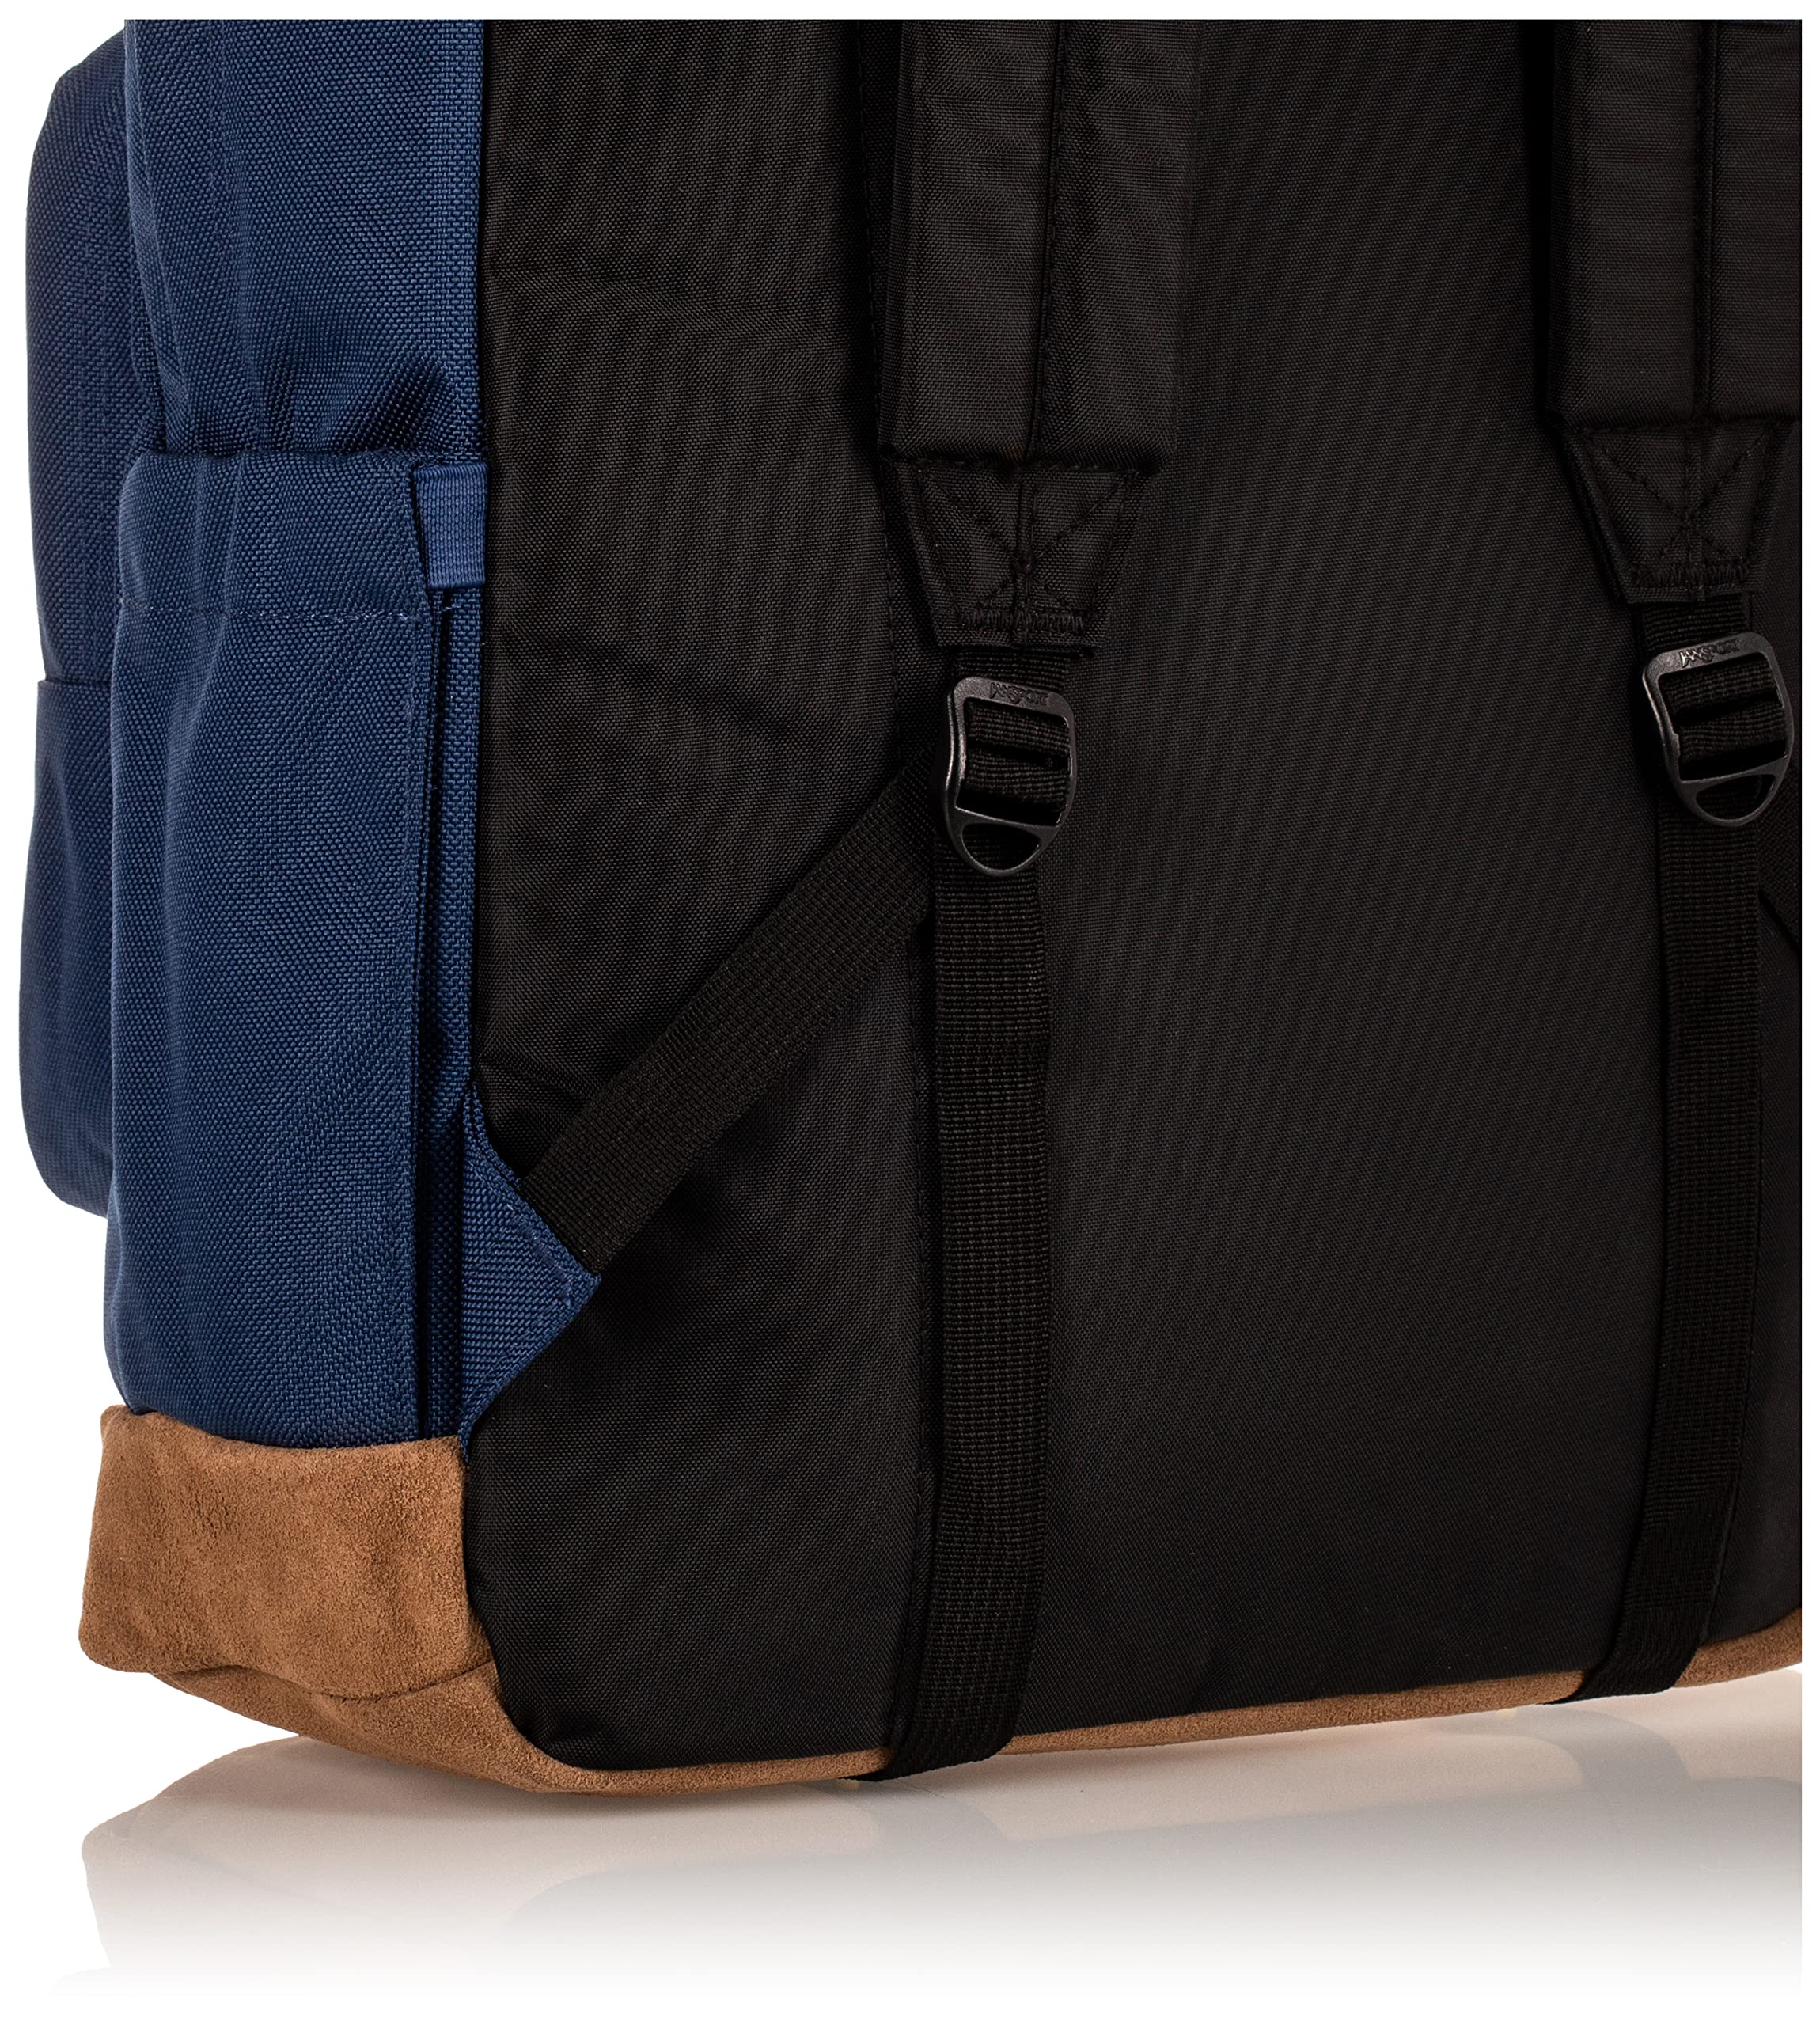 JanSport Right Pack Backpack - Travel, Work, or Laptop Bookbag with Leather Bottom, Navy